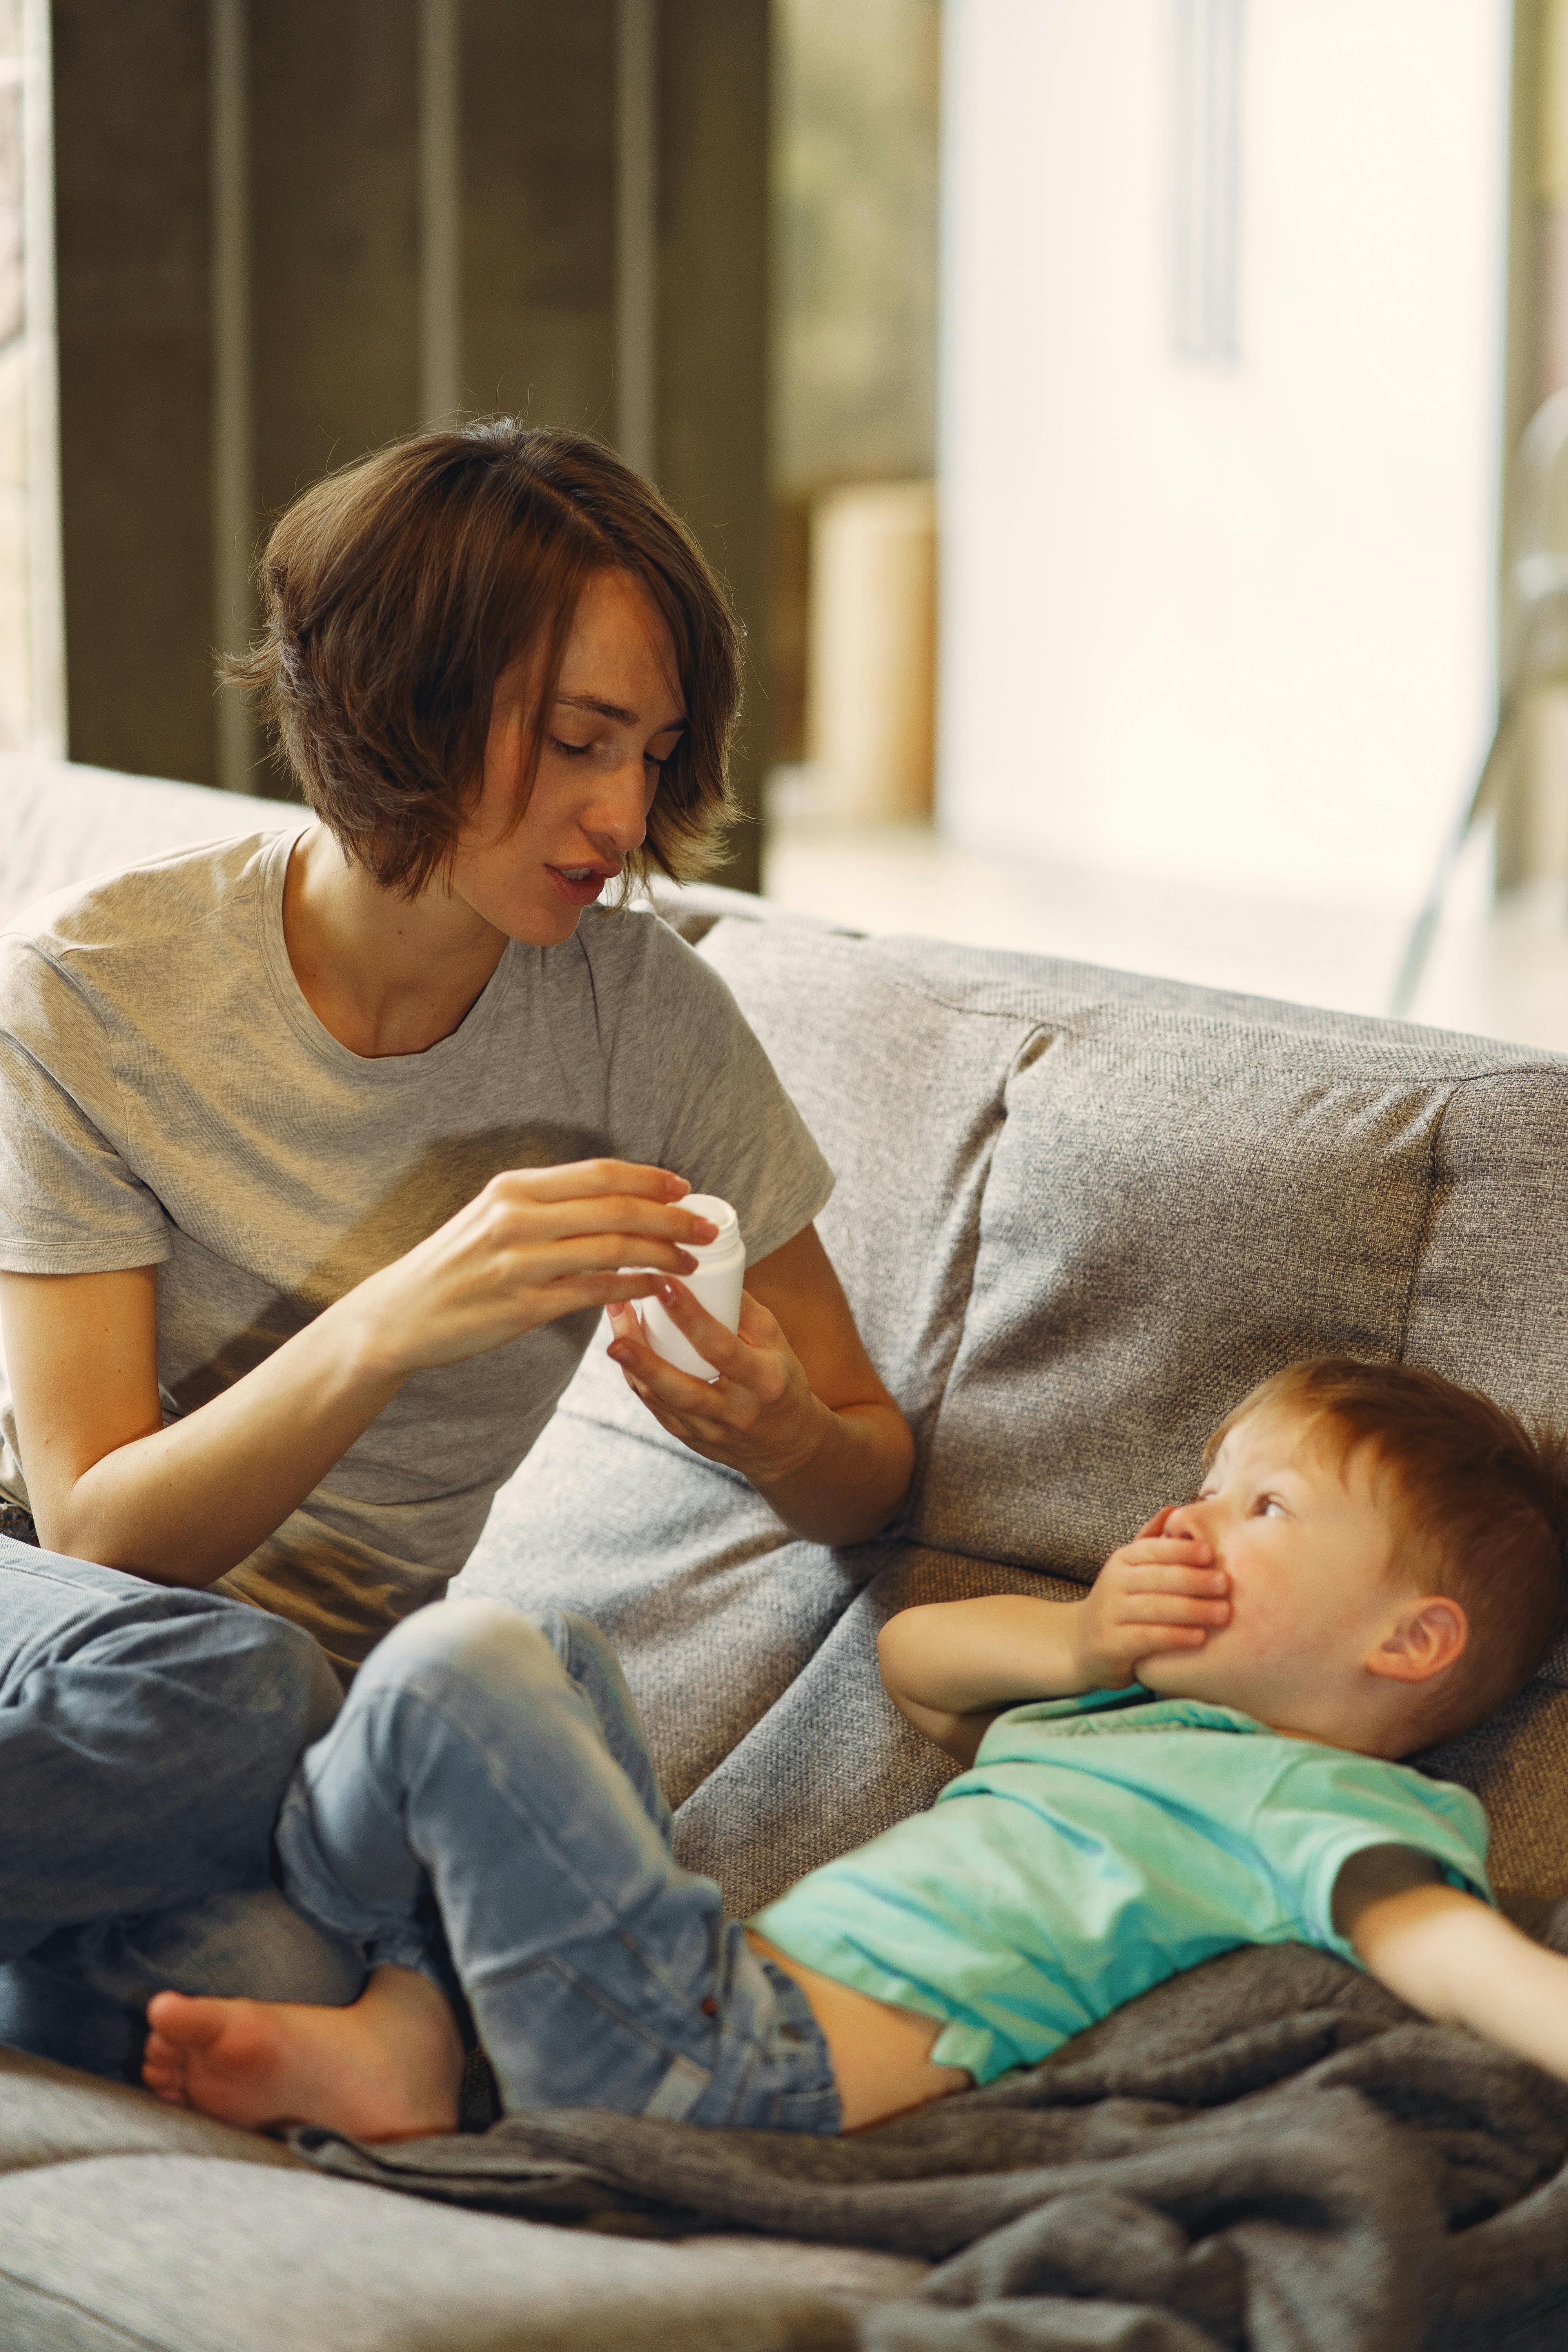 Boy with his mother on the couch, hand on his mouth | Source: Pexels